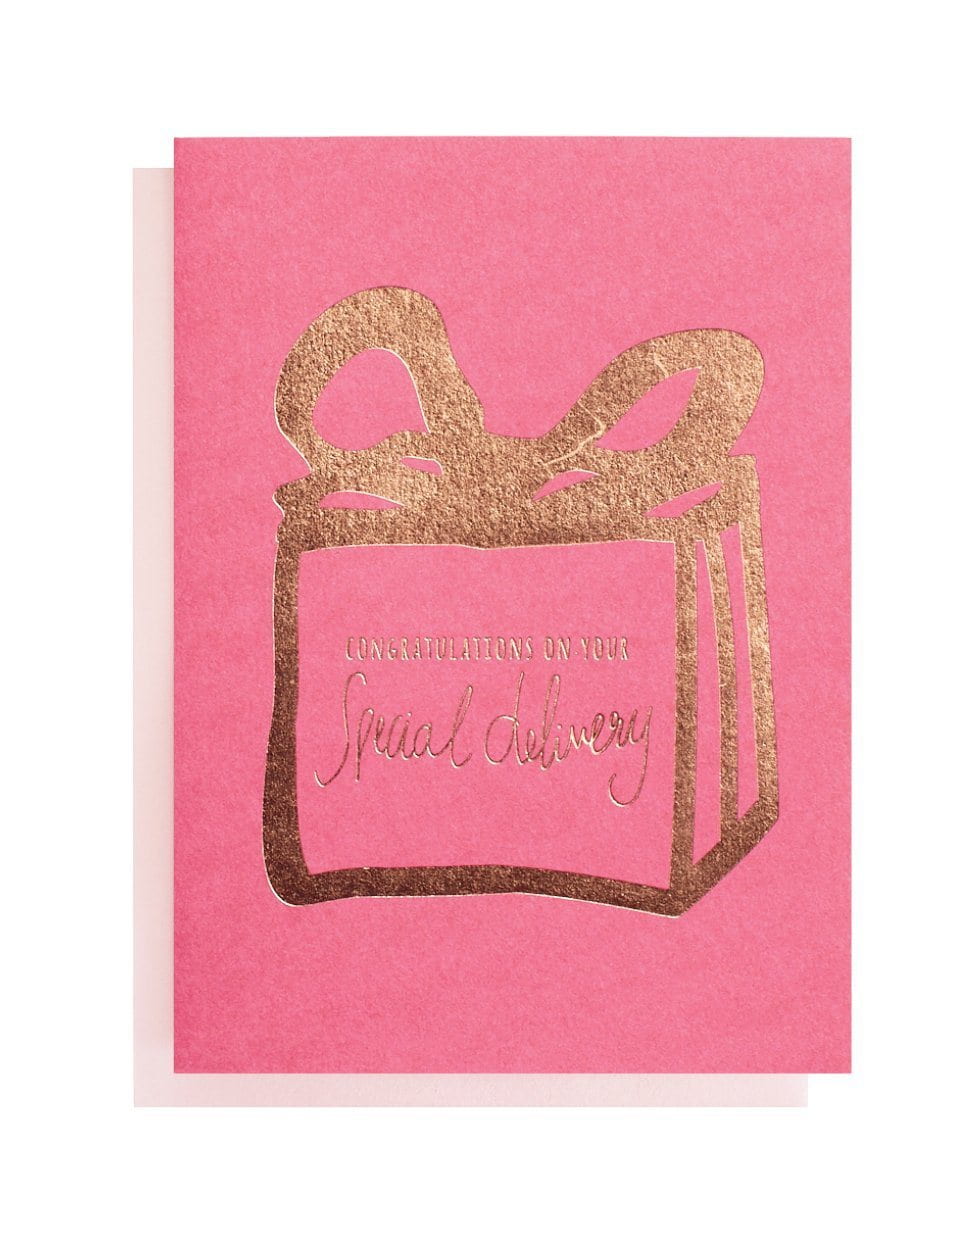 Special Delivery Foiled Greeting Card